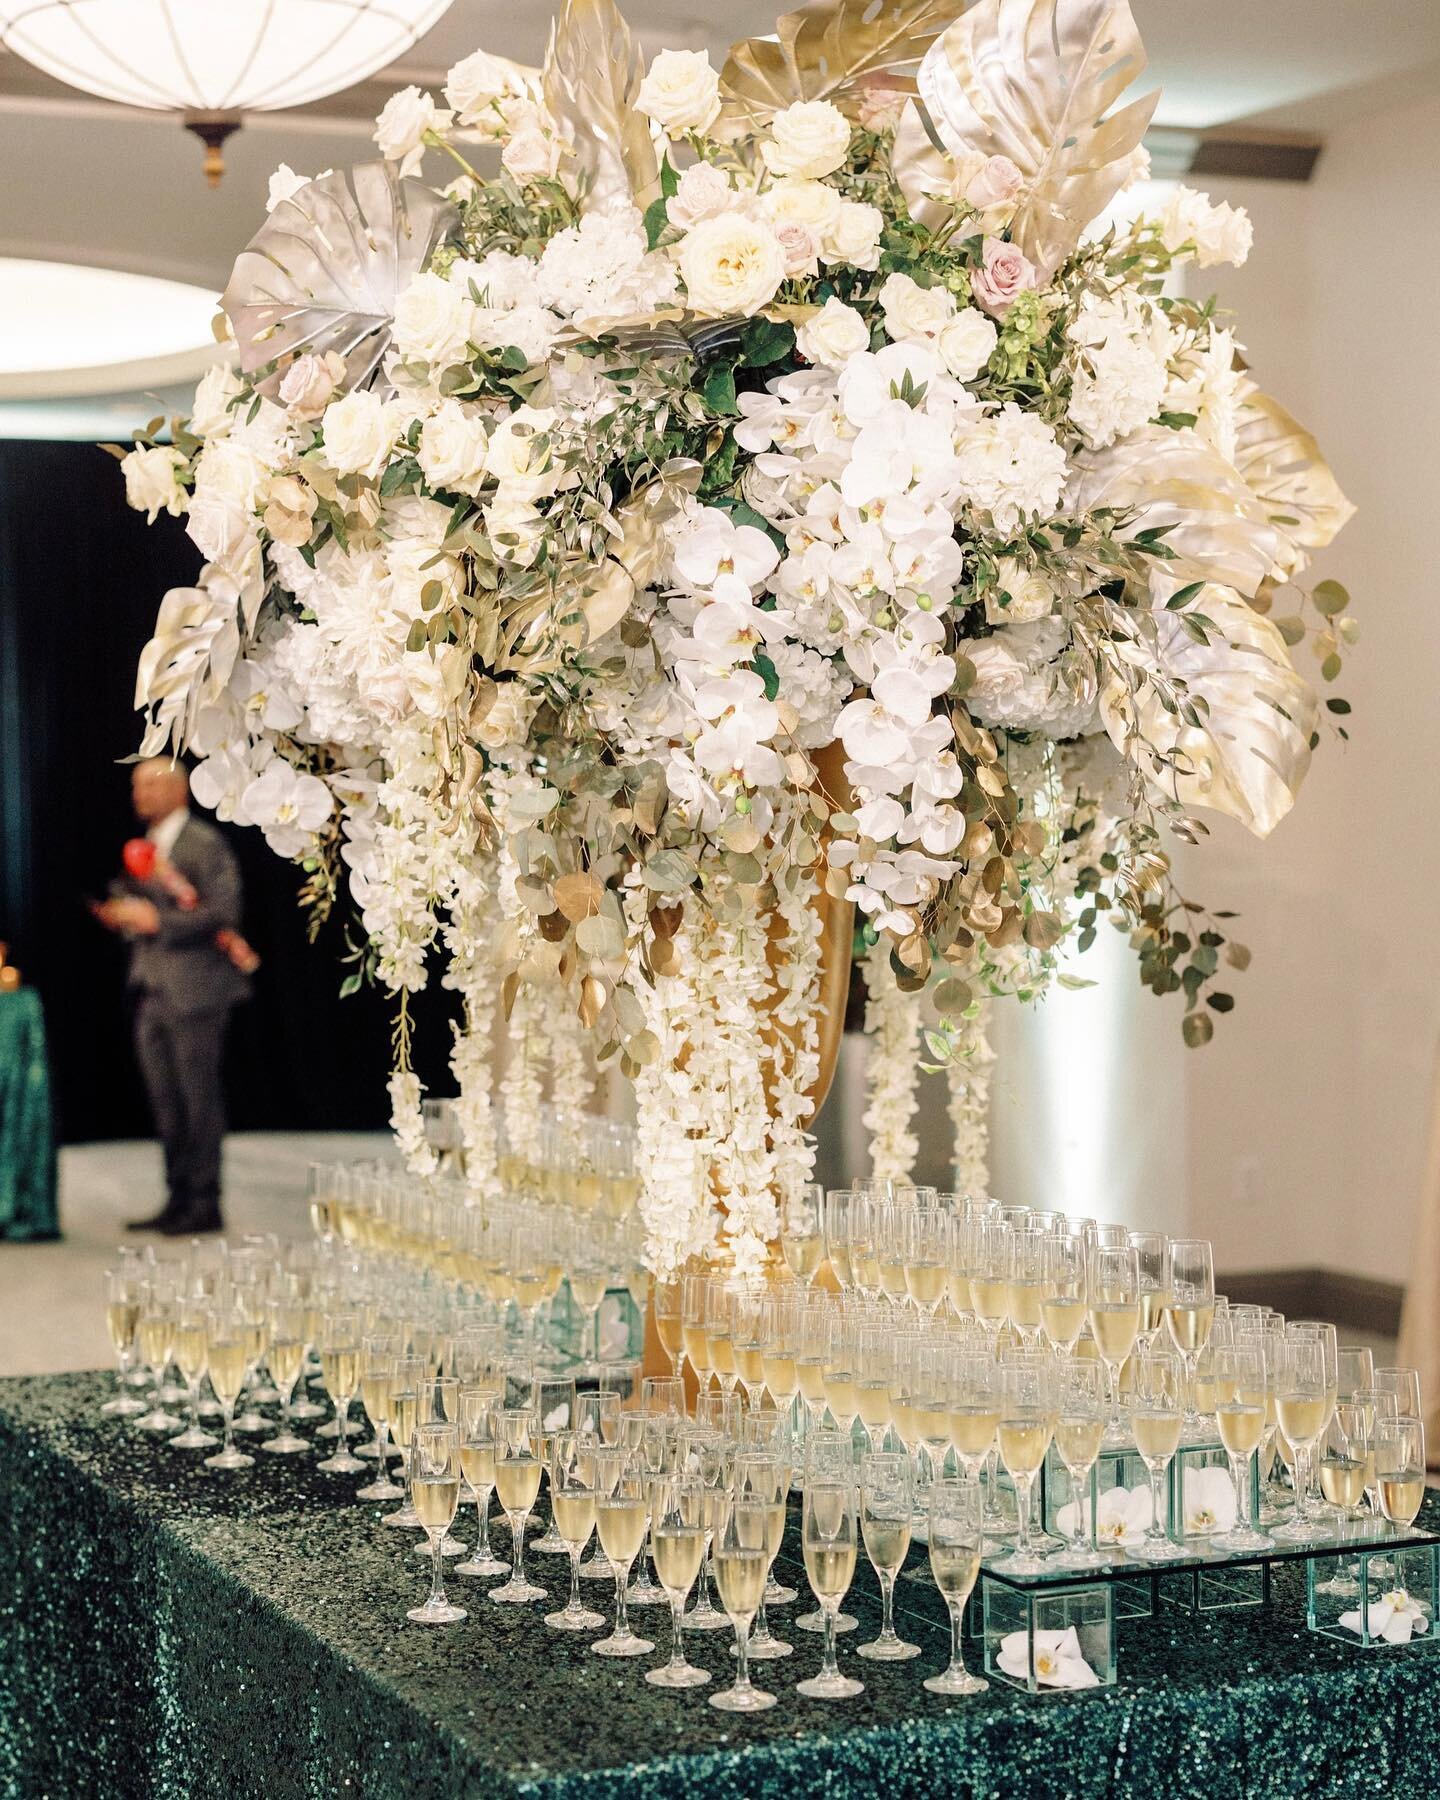 These luxe metallic dusted florals and bubbly champagne are getting us excited for the weekend.

Floral: @festivestl 
Photo: @mikecassimatis 
Planning: @kristinashleyevents 
Linen: @nuagedesignsinc 
Venue: @marriottstlouis